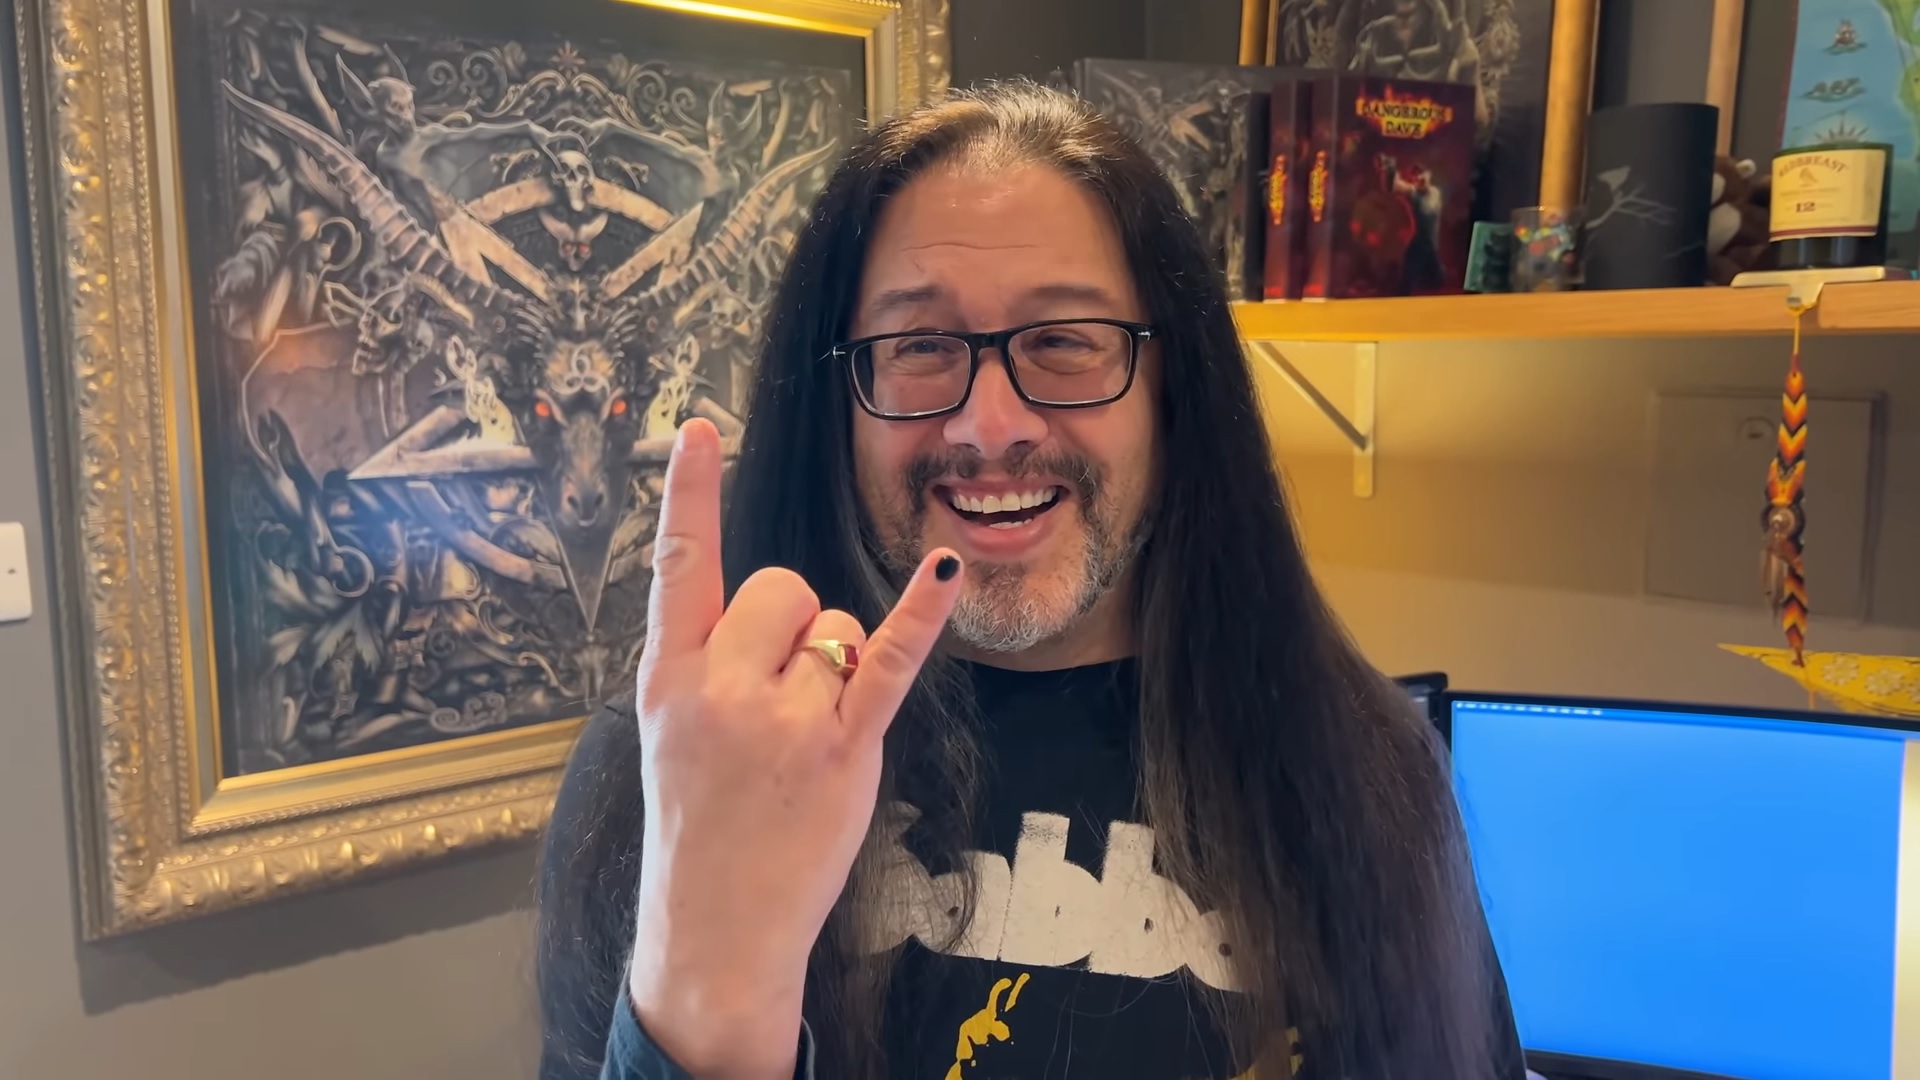  Mighty allfather of FPS games and co-creator of Doom John Romero decrees that 'gib' is pronounced in the most upsetting way possible 